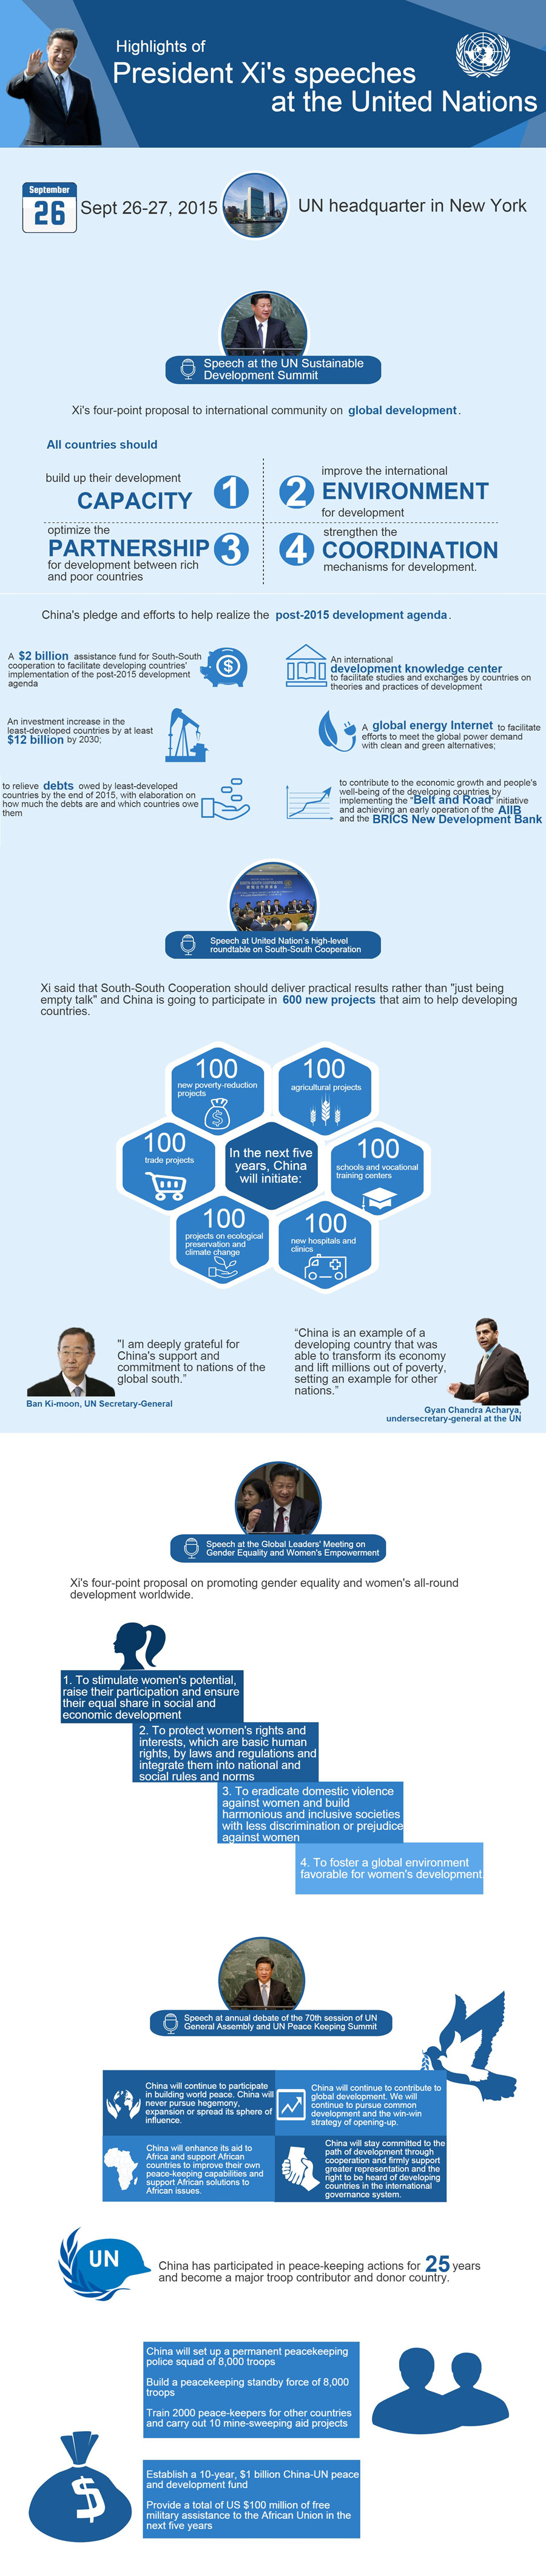 Highlights of President Xi's speeches at UN